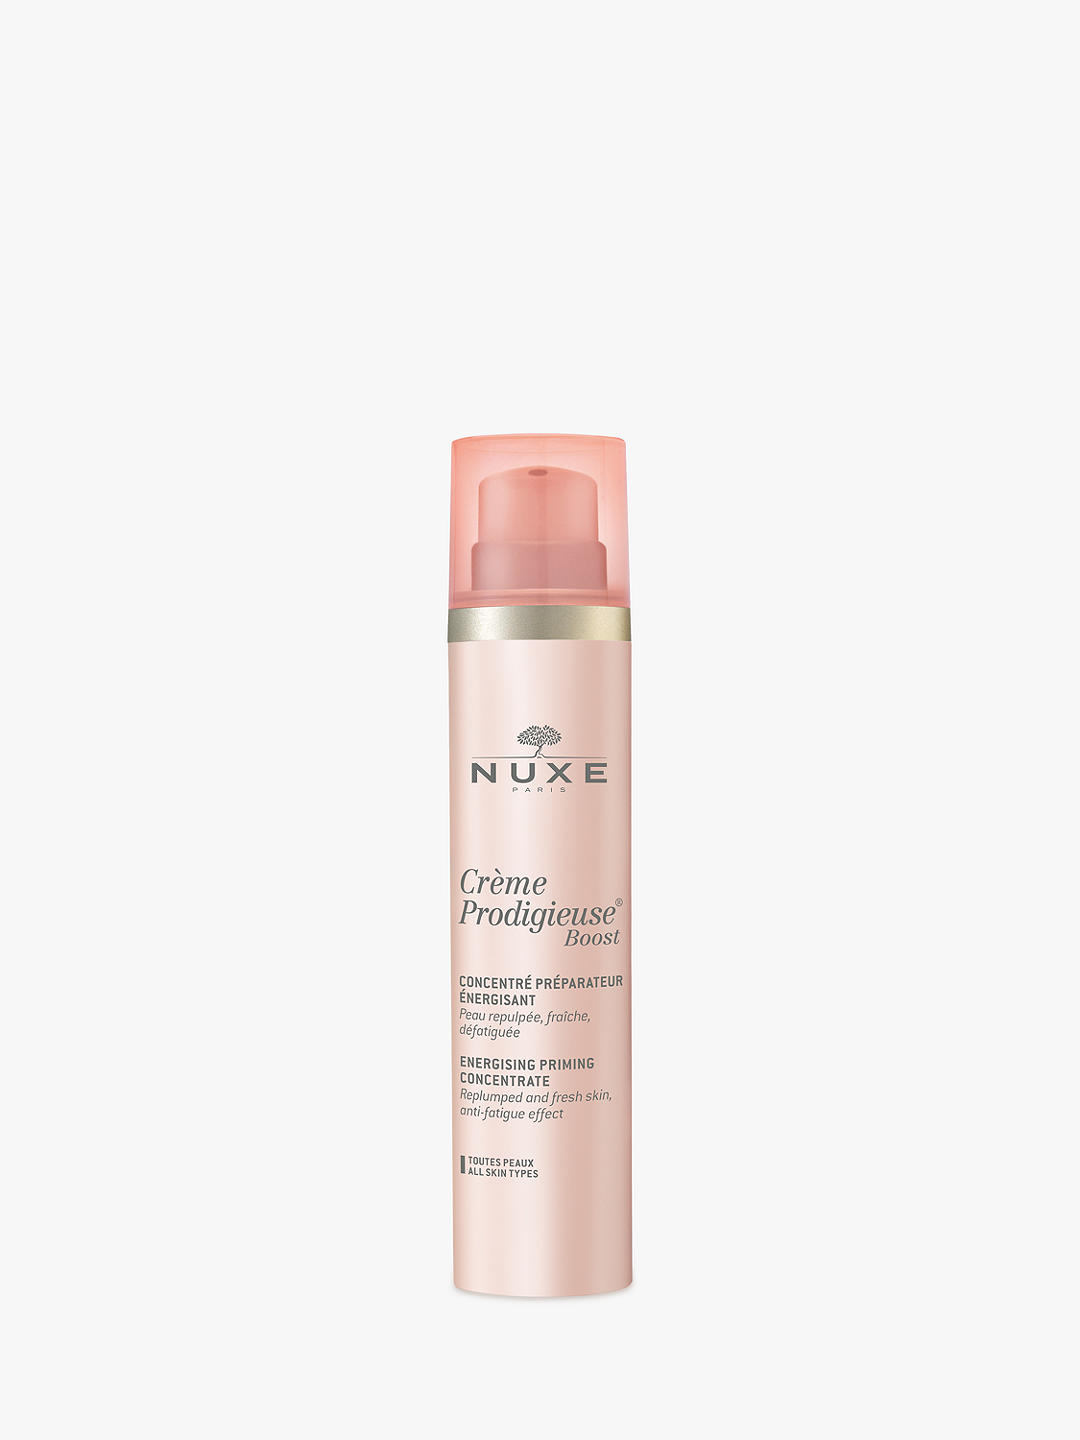 NUXE Crème Prodigieuse® Boost Energising Priming Concentrate, 100ml 1